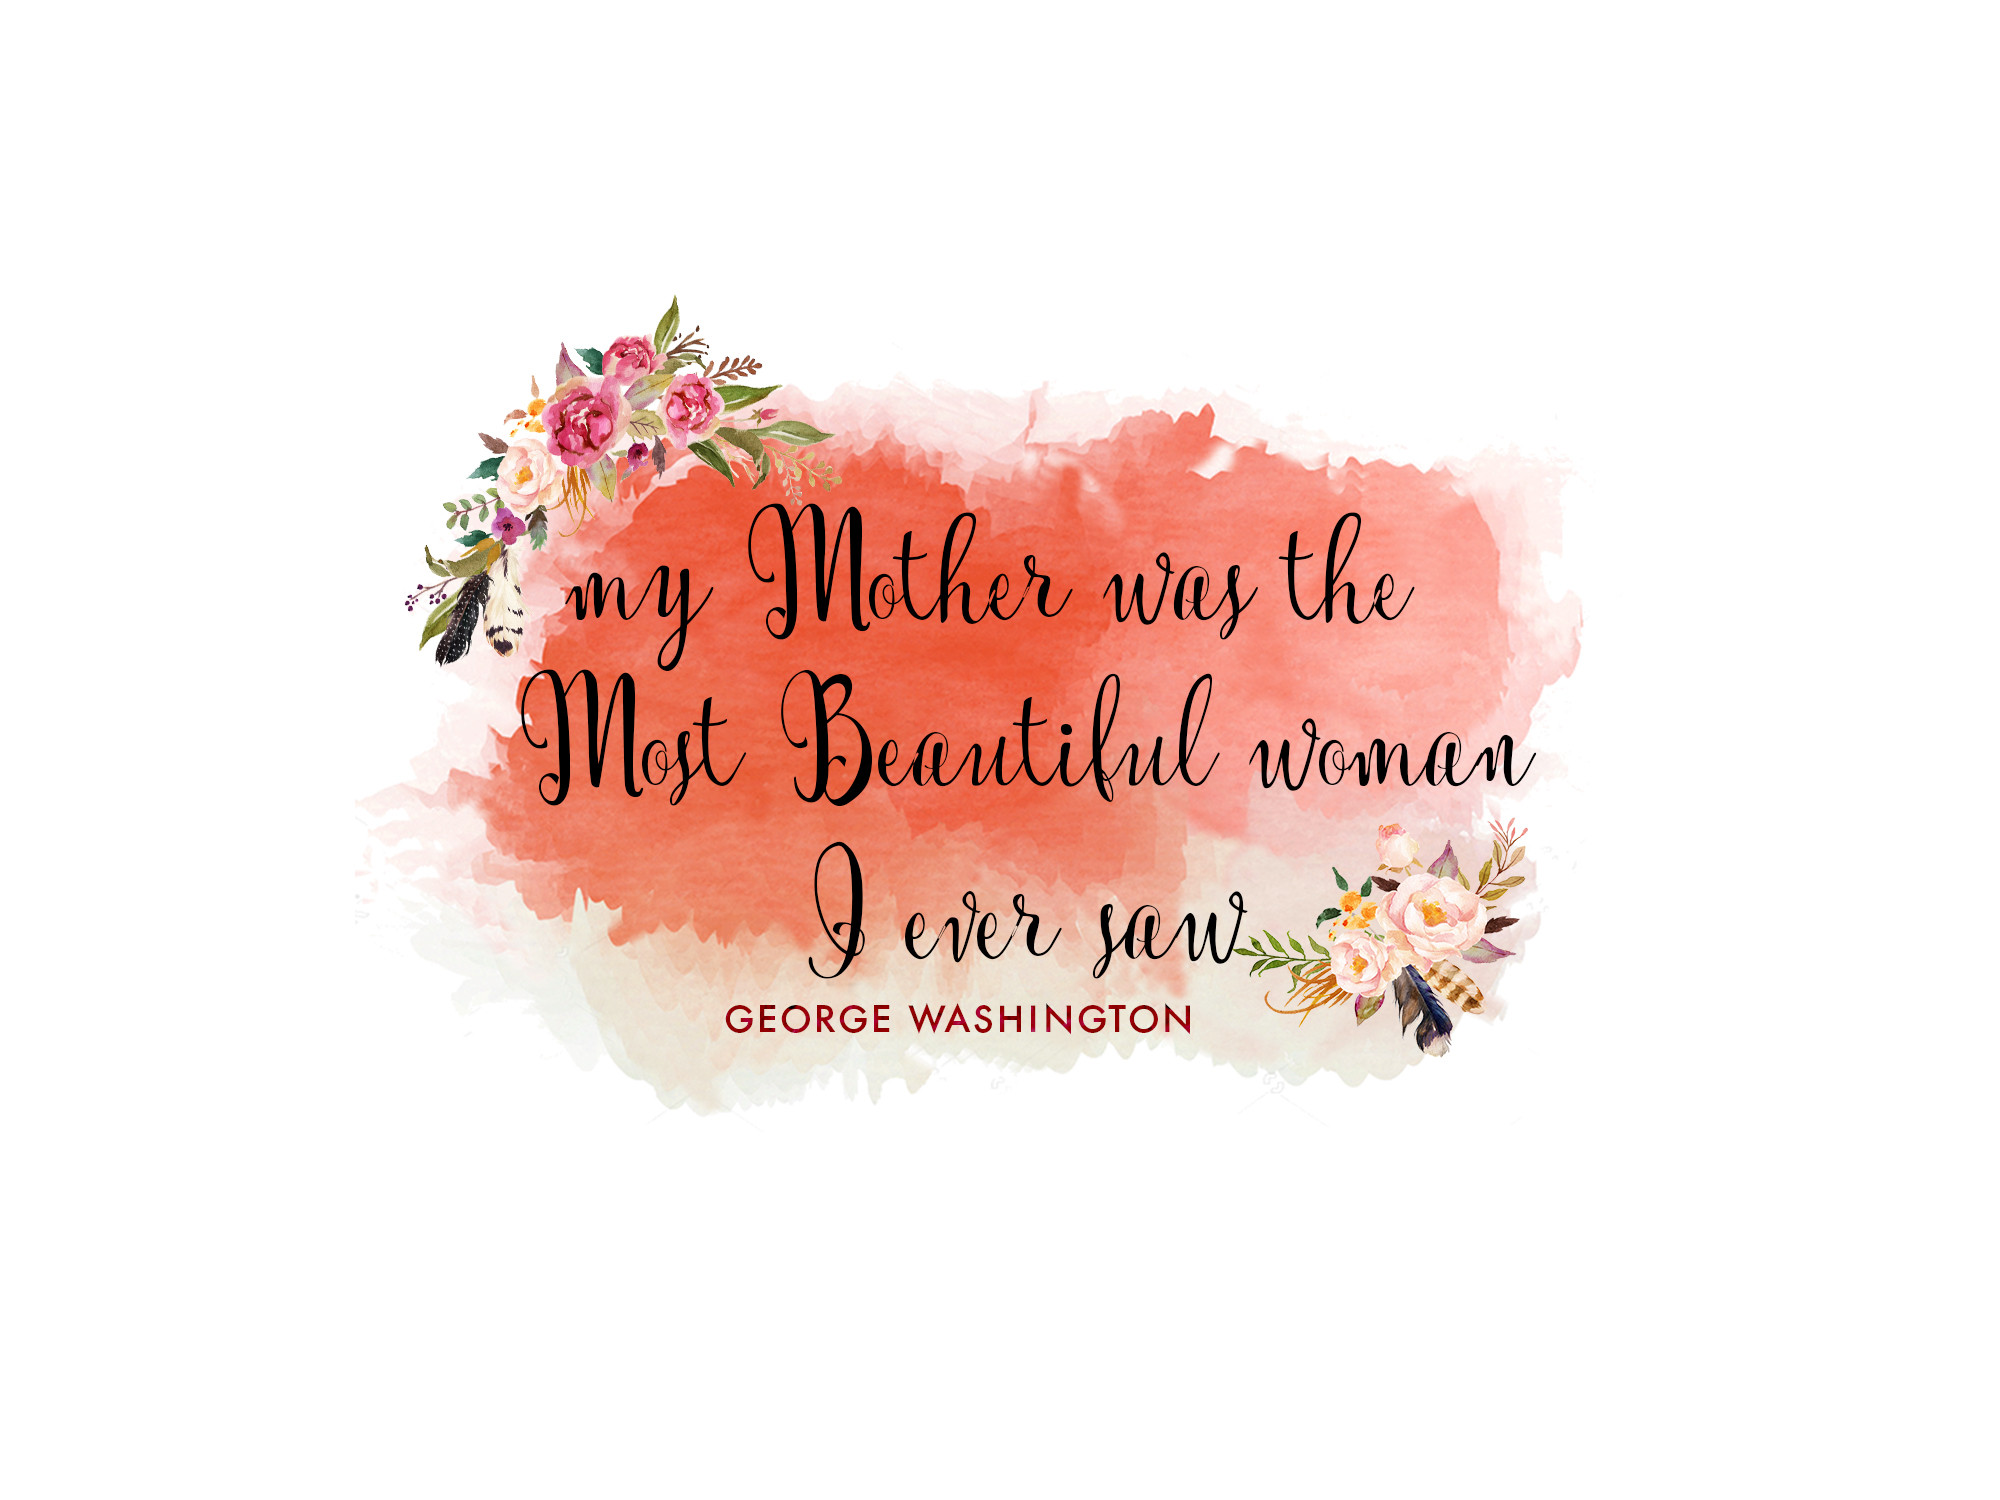 Mothers Day Quotes For Mom
 Mother s Day Quotes Slogans Quotations & Sayings 2019